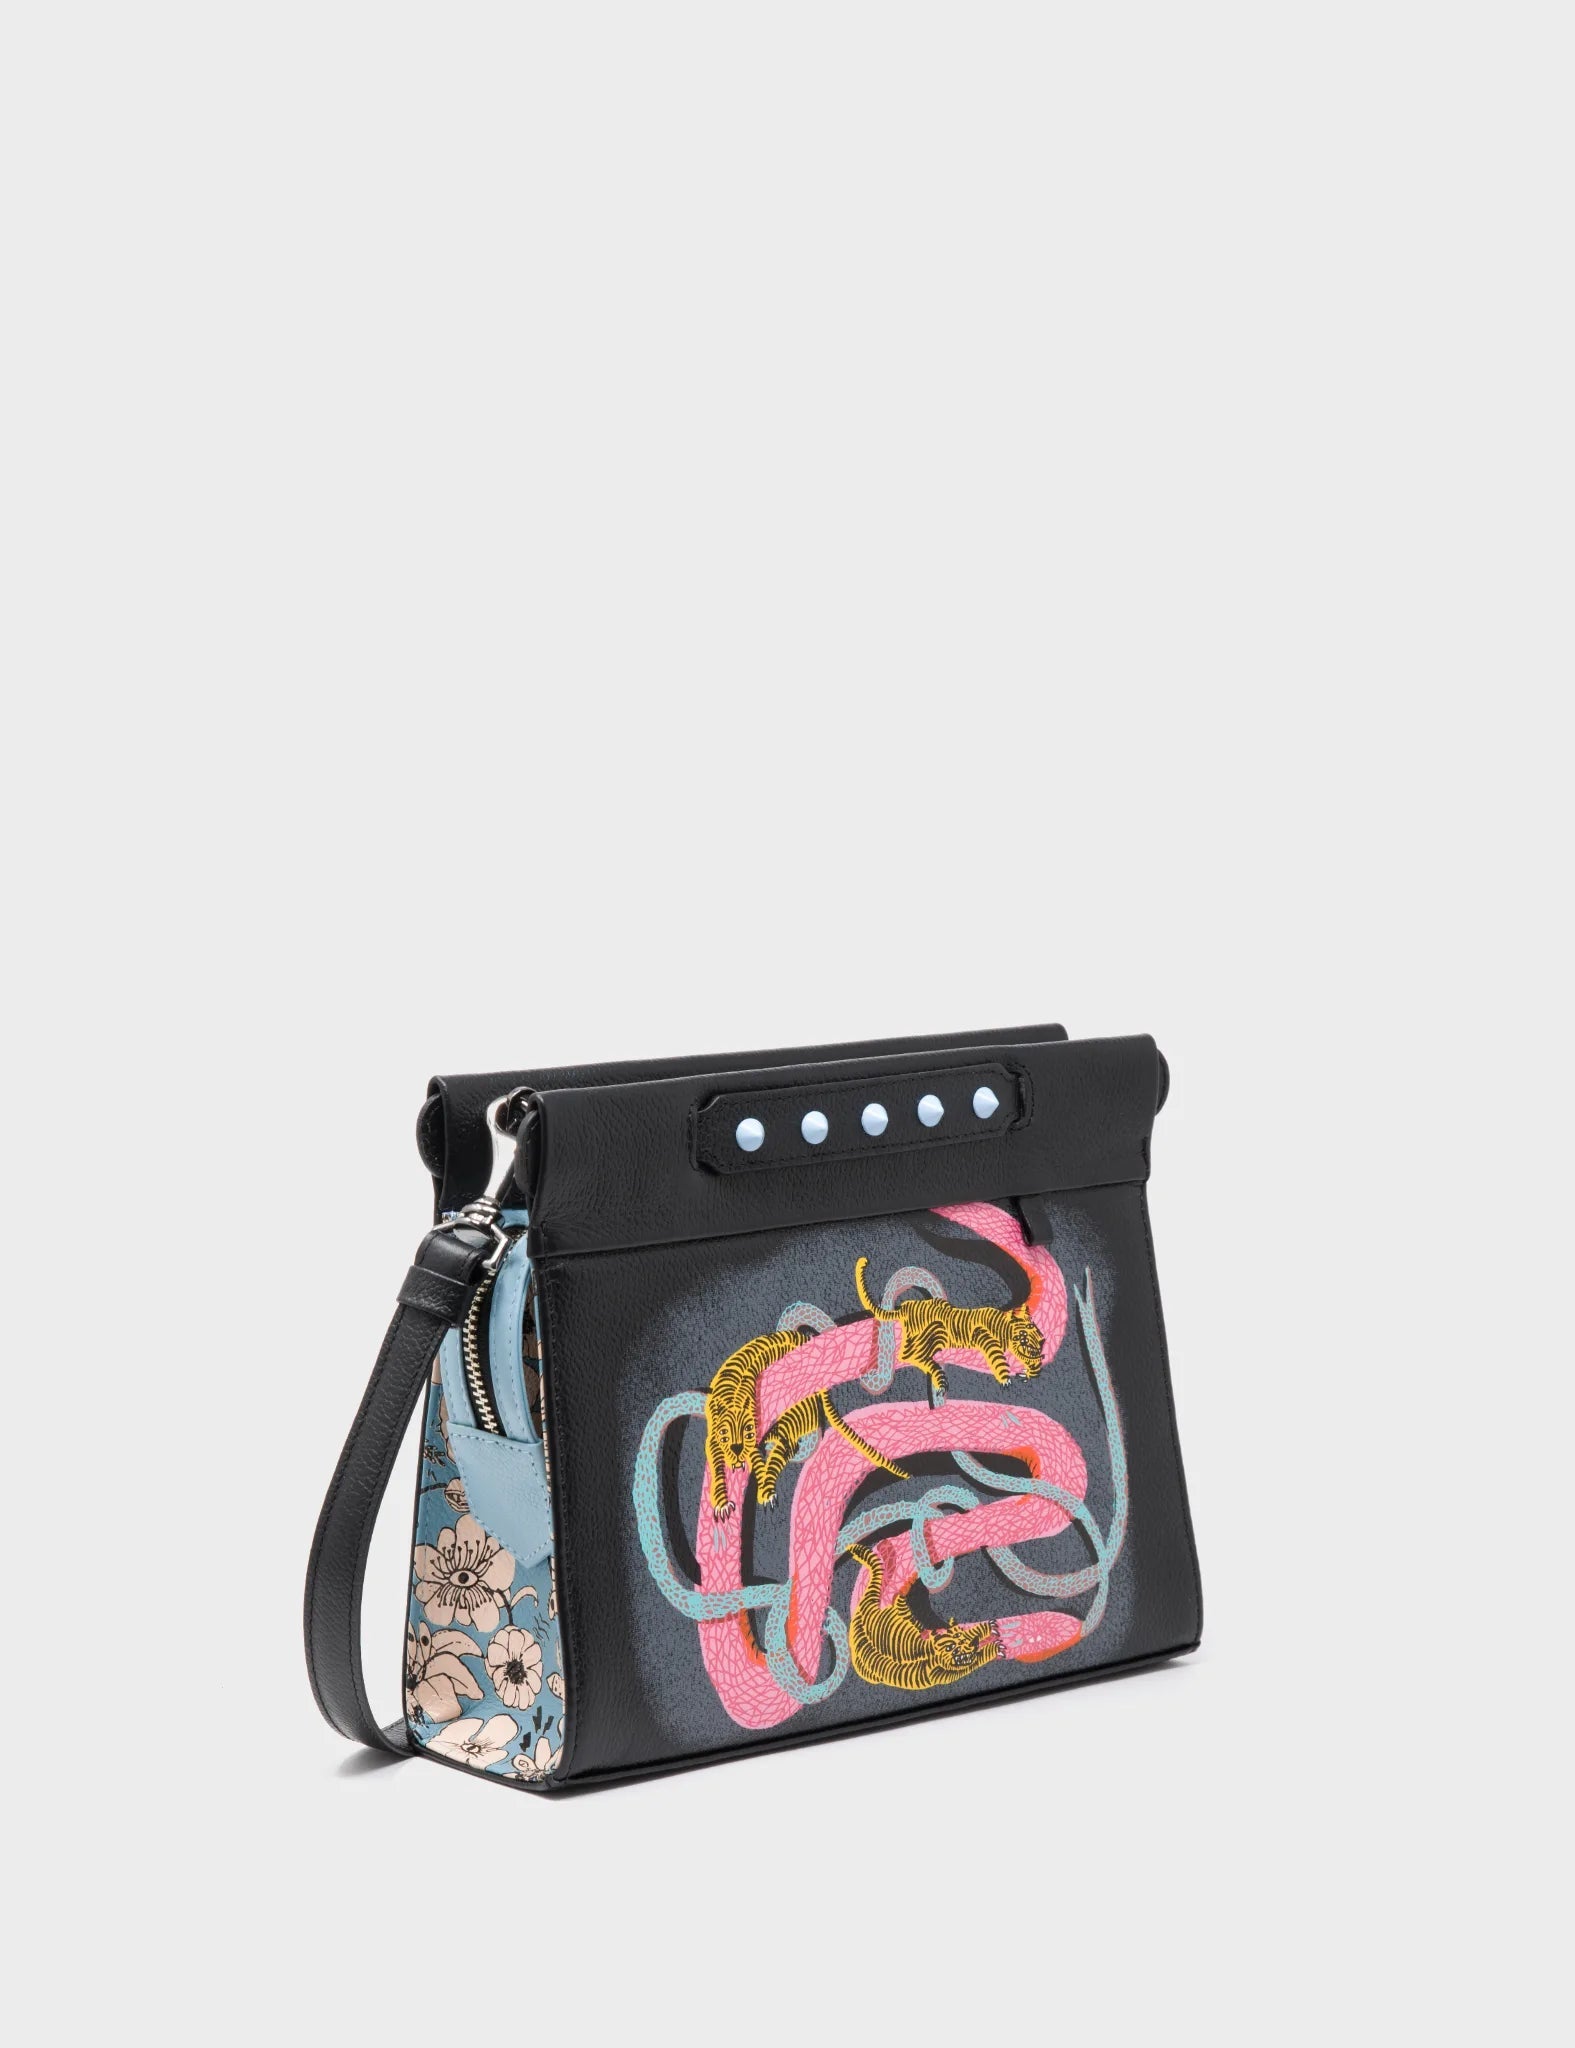 Crossbody Small Black And Stratosphere Blue Leather Bag - Tiger & Snake Print